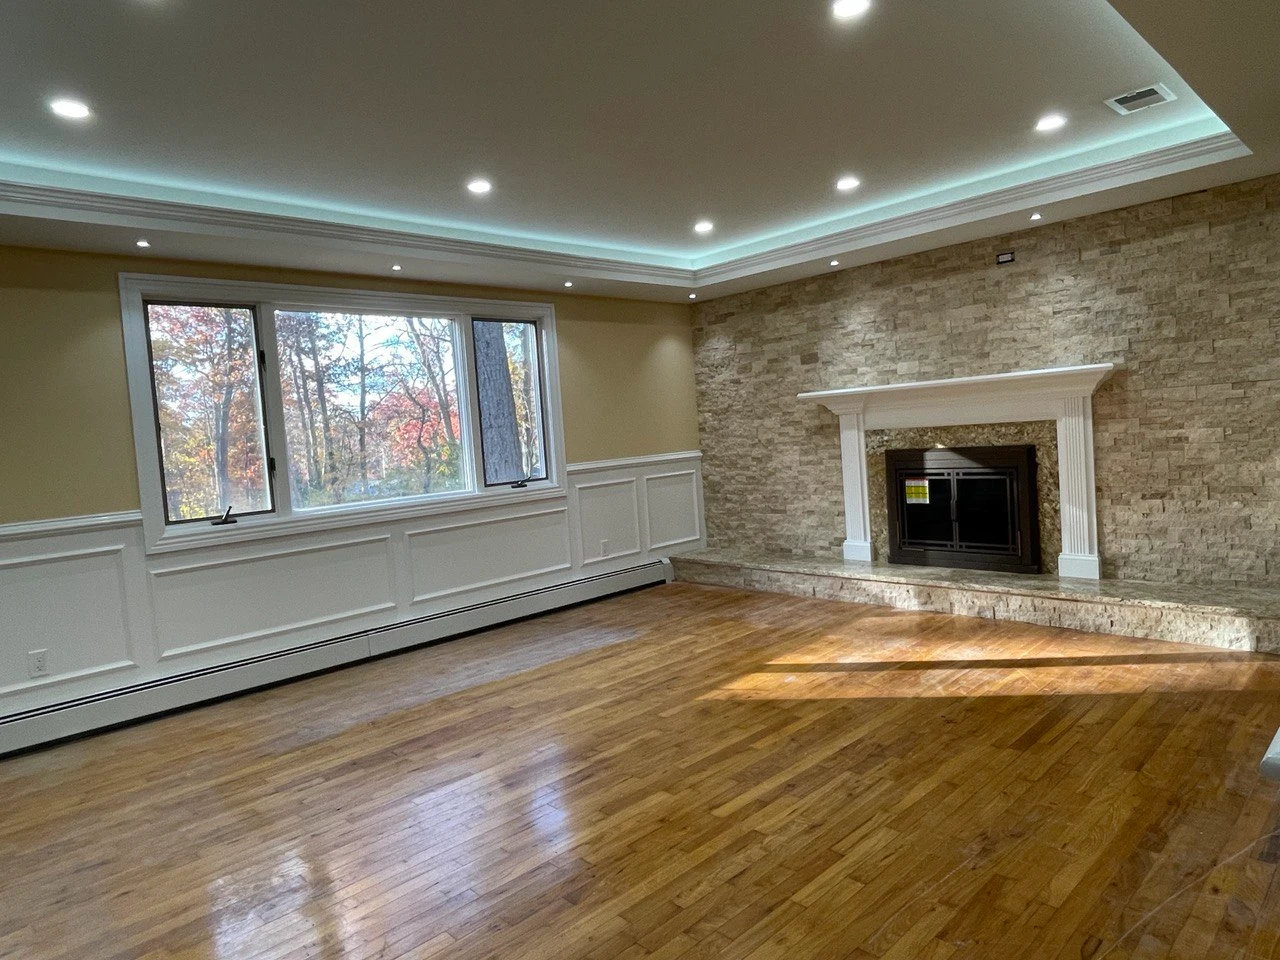 Moldings & Paneling Service in New York, Long Island